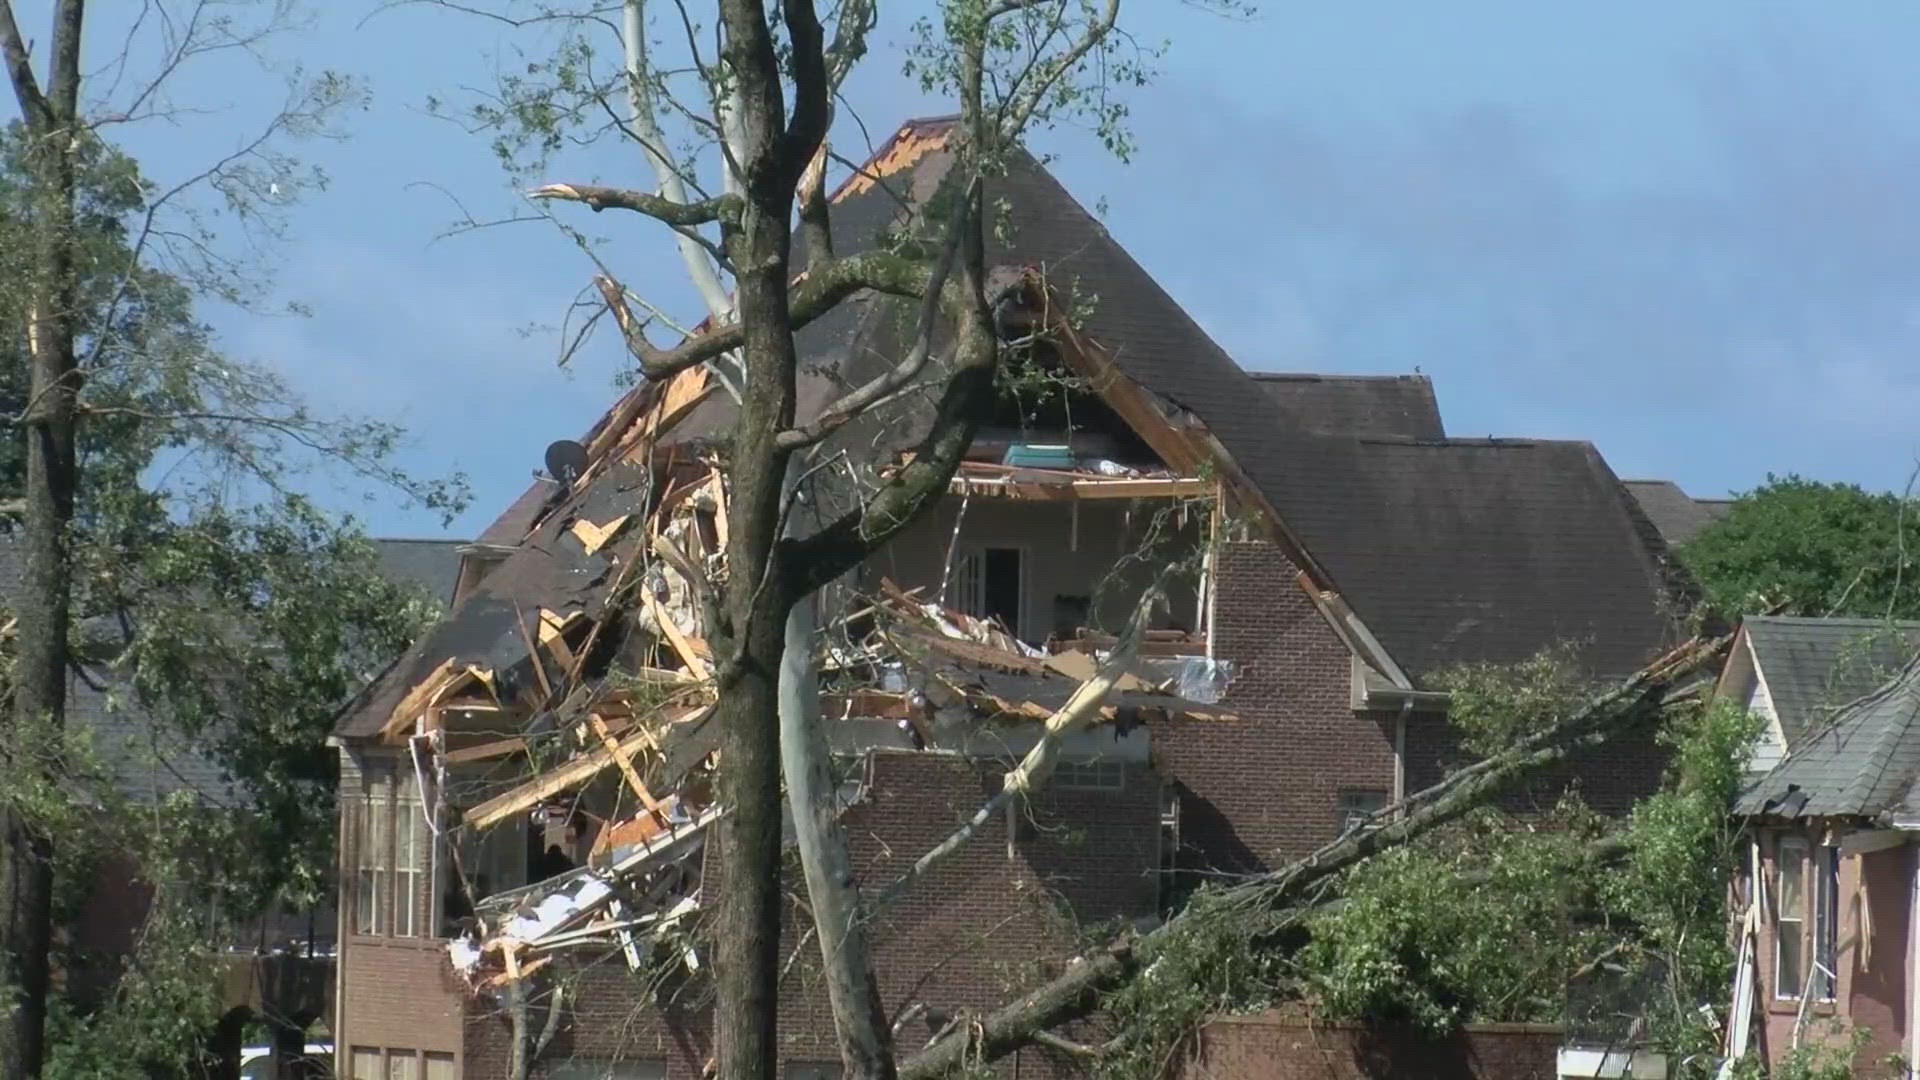 Emergency management officials estimate that around 25 to 30 homes suffered major damage.